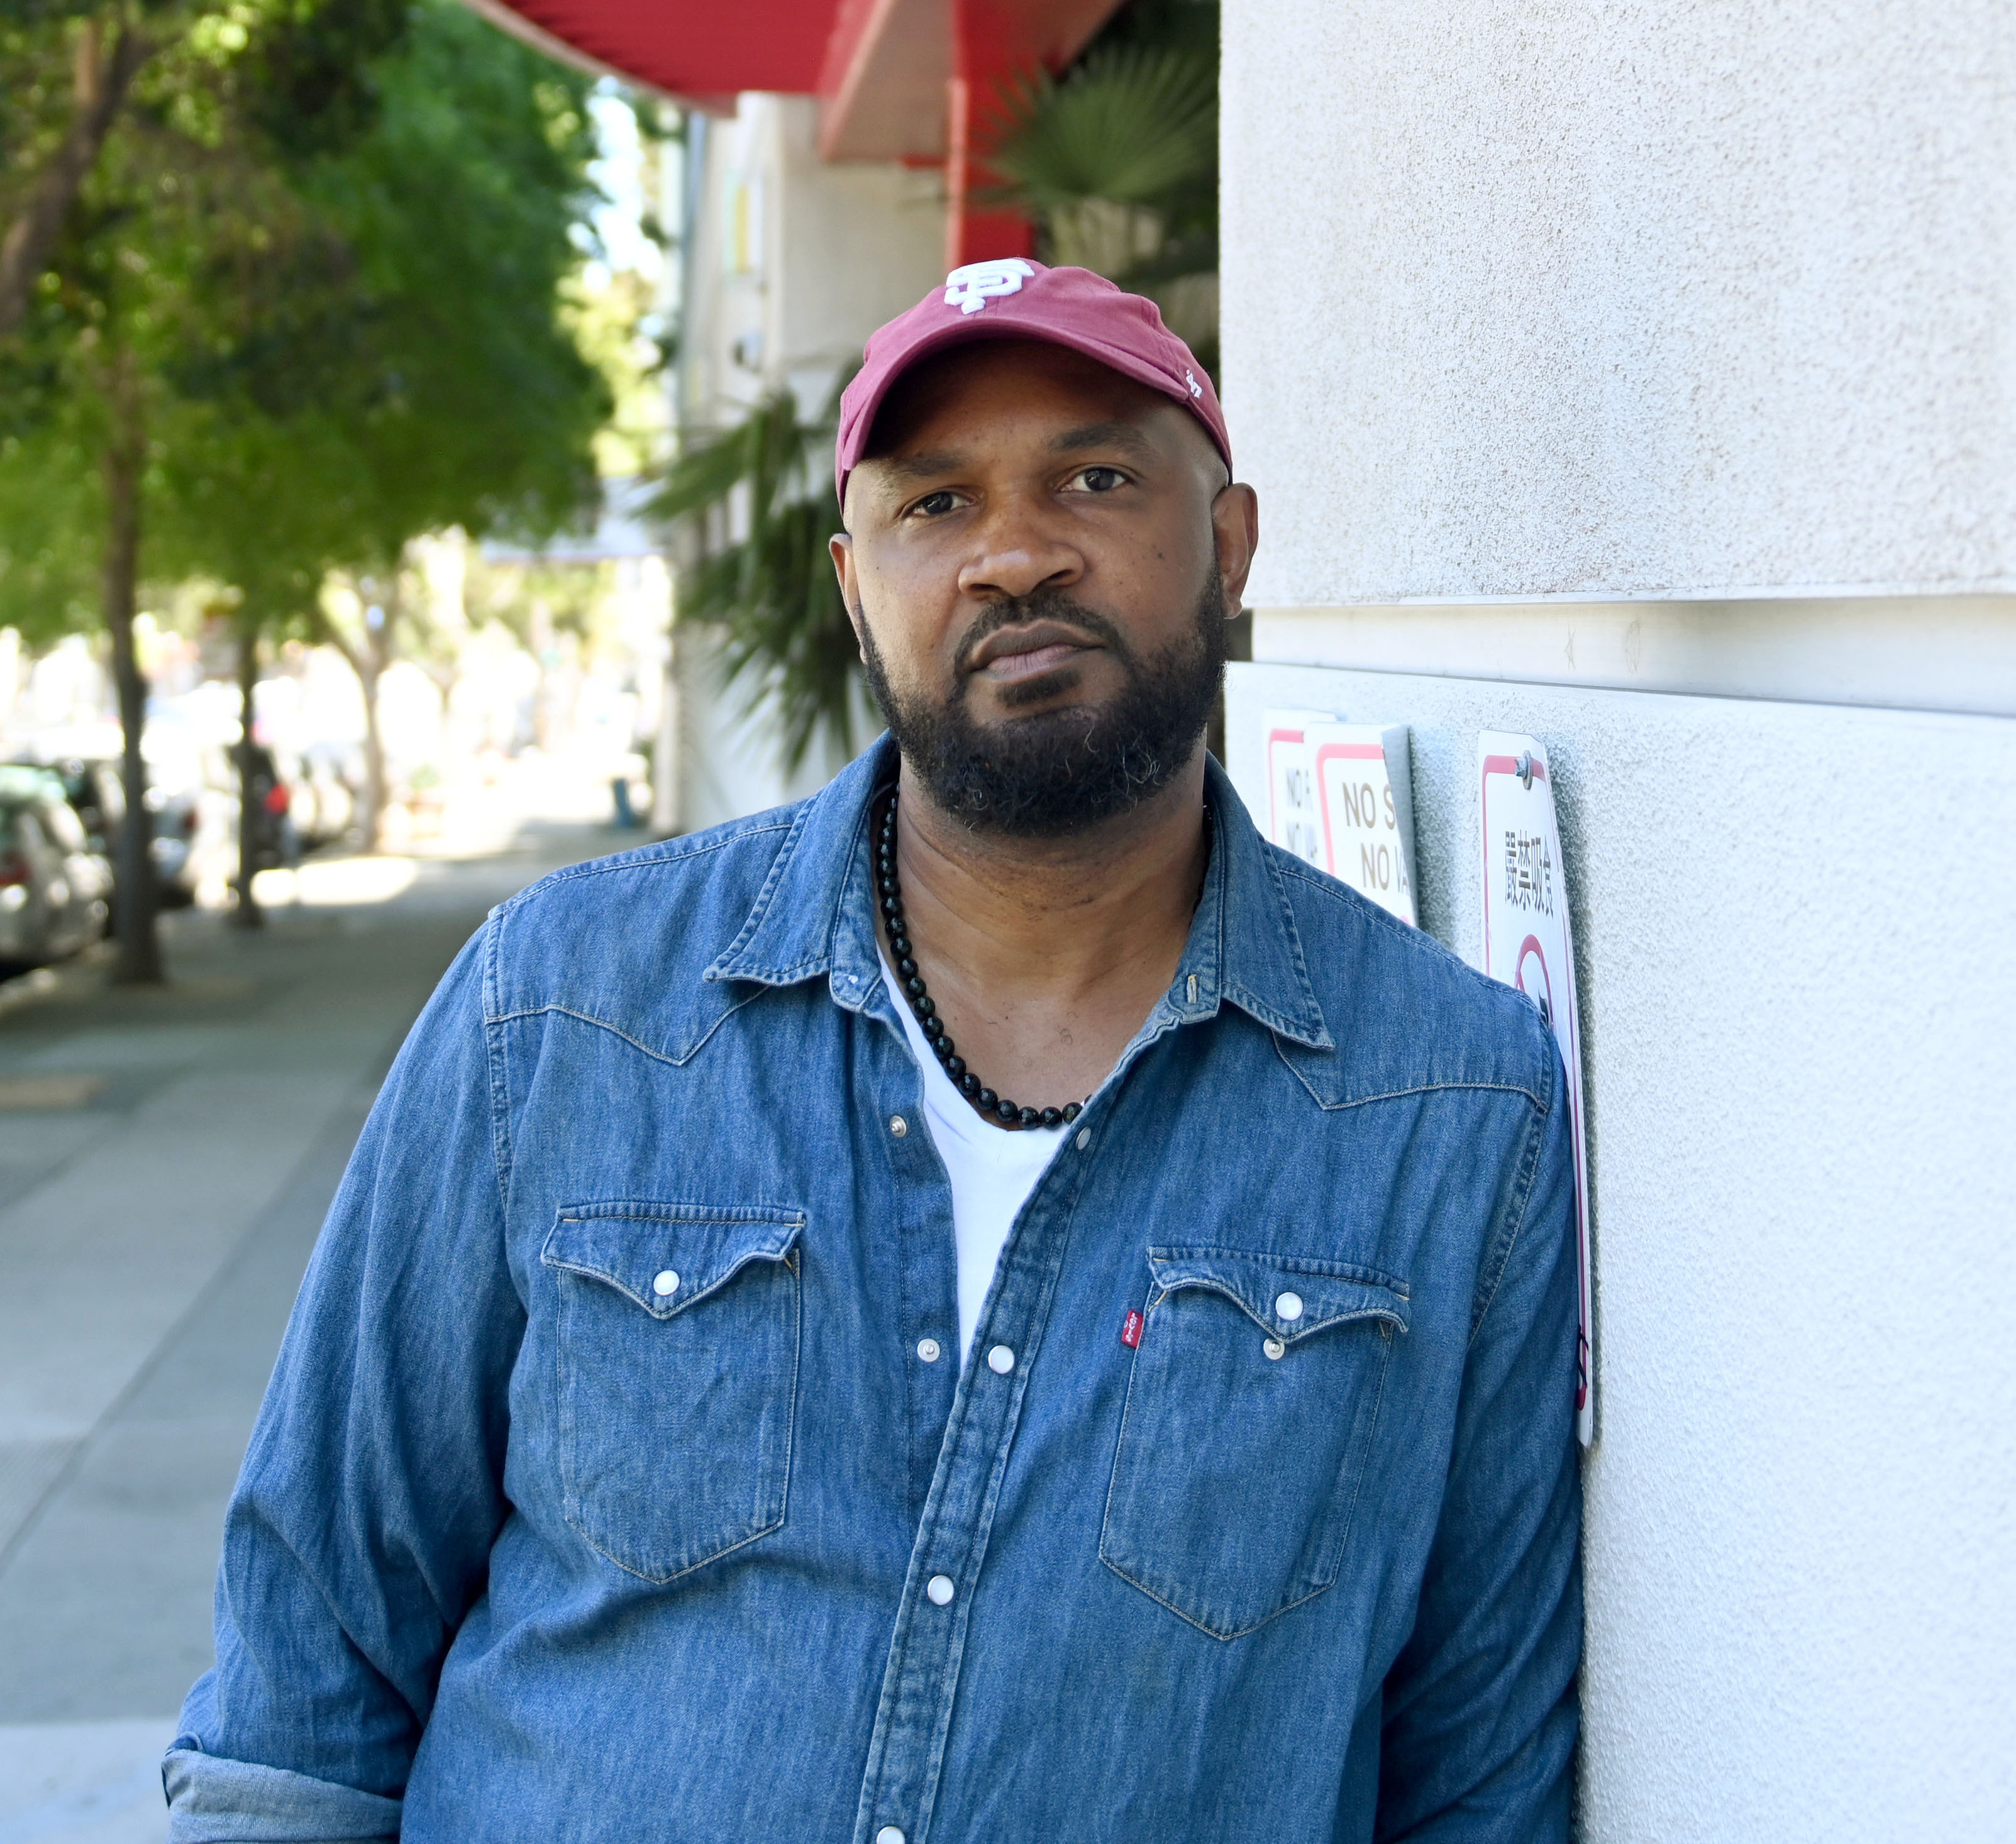 A man with a beard, wearing a red cap, denim shirt, and beaded necklace, leans against a wall on a quiet street lined with trees and parked cars.